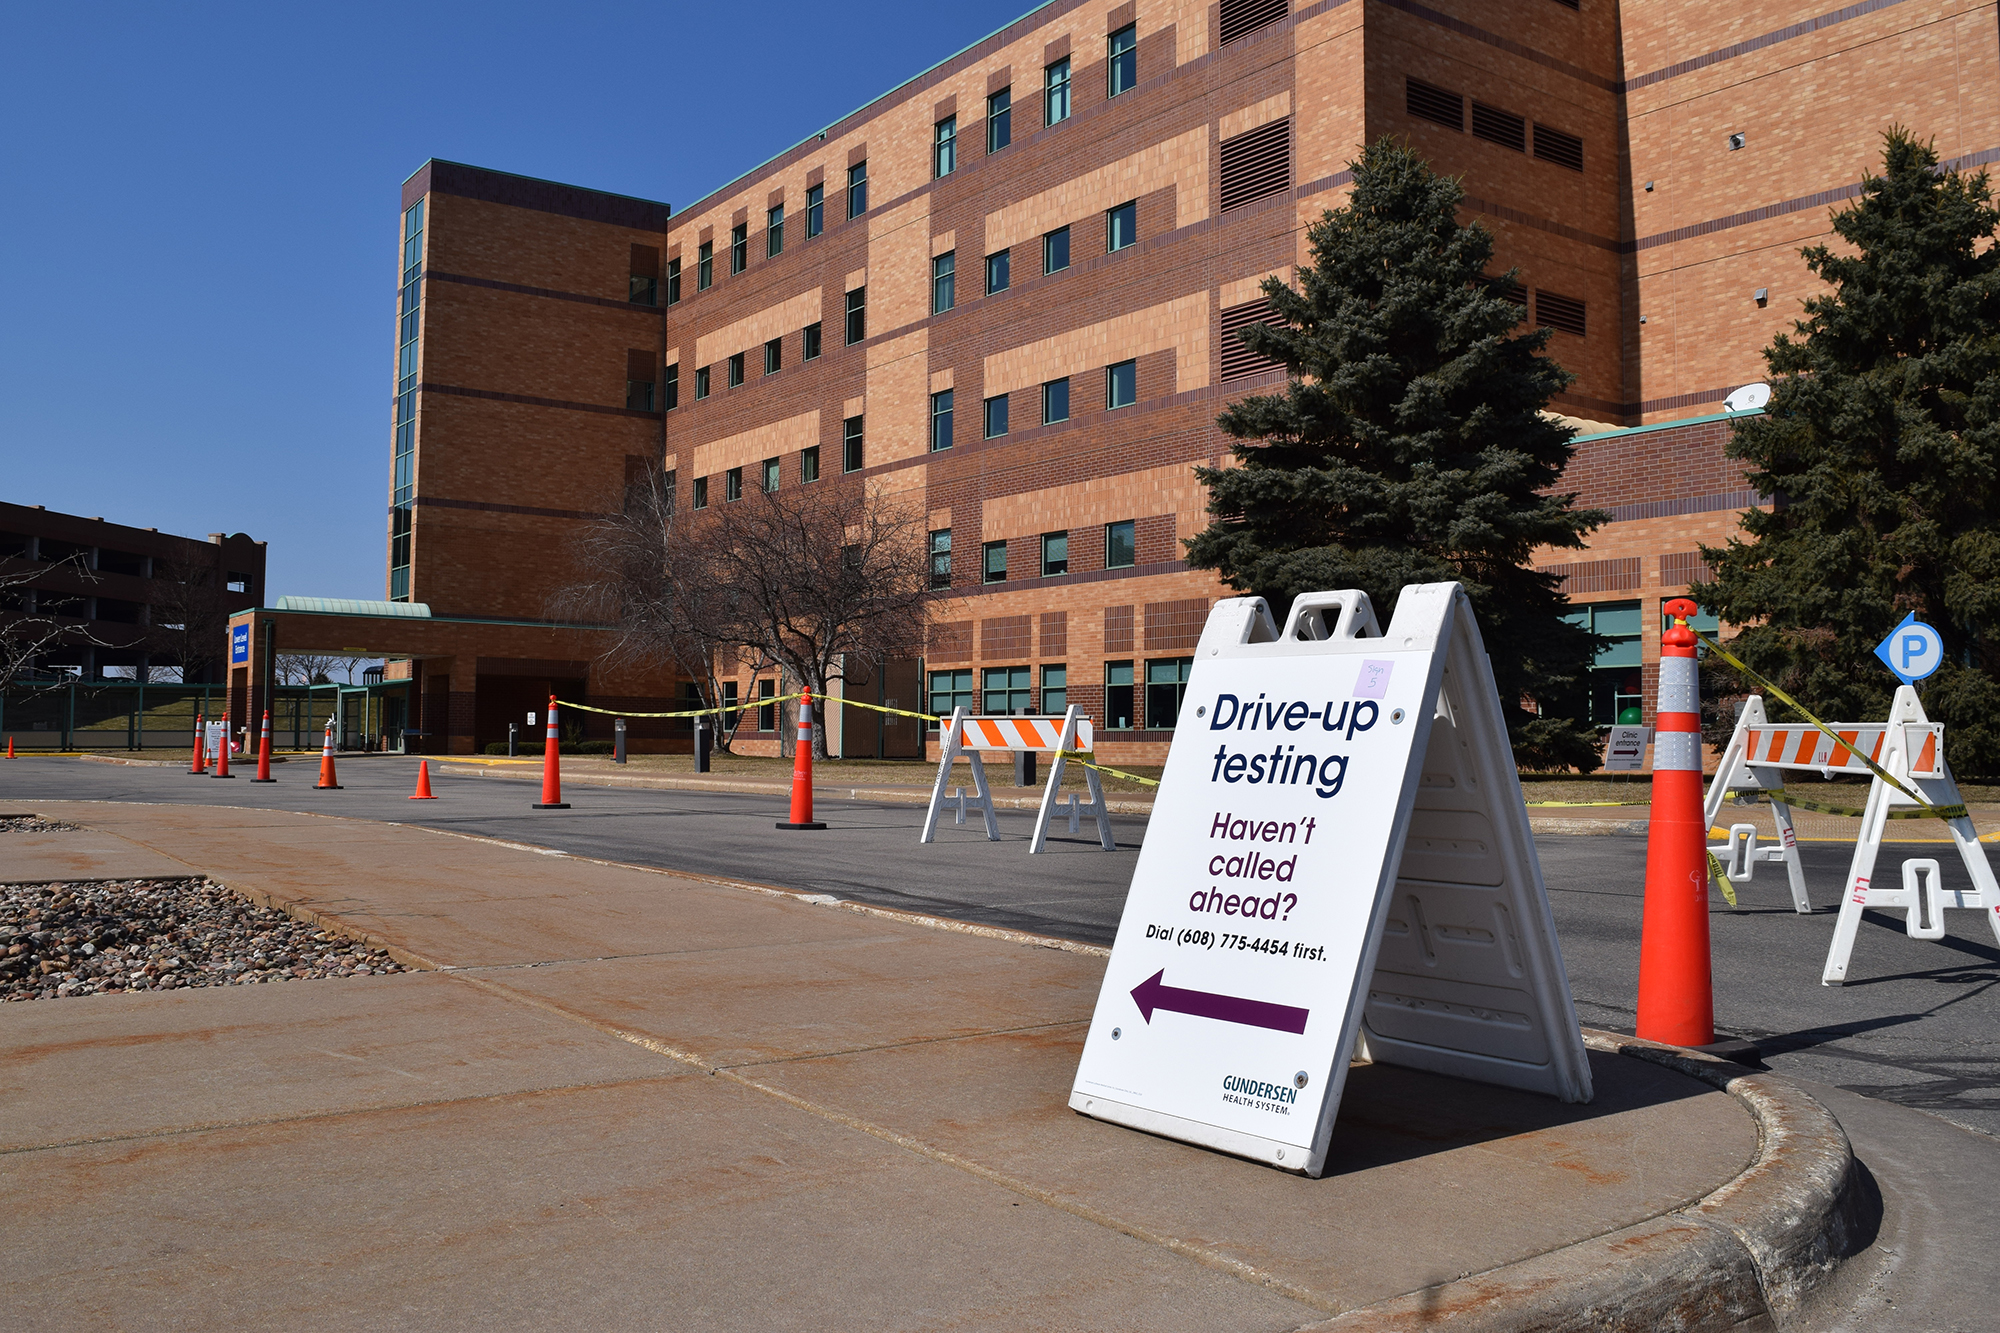 Gundersen Health System is offering drive-up testing at their Onalaska clinic